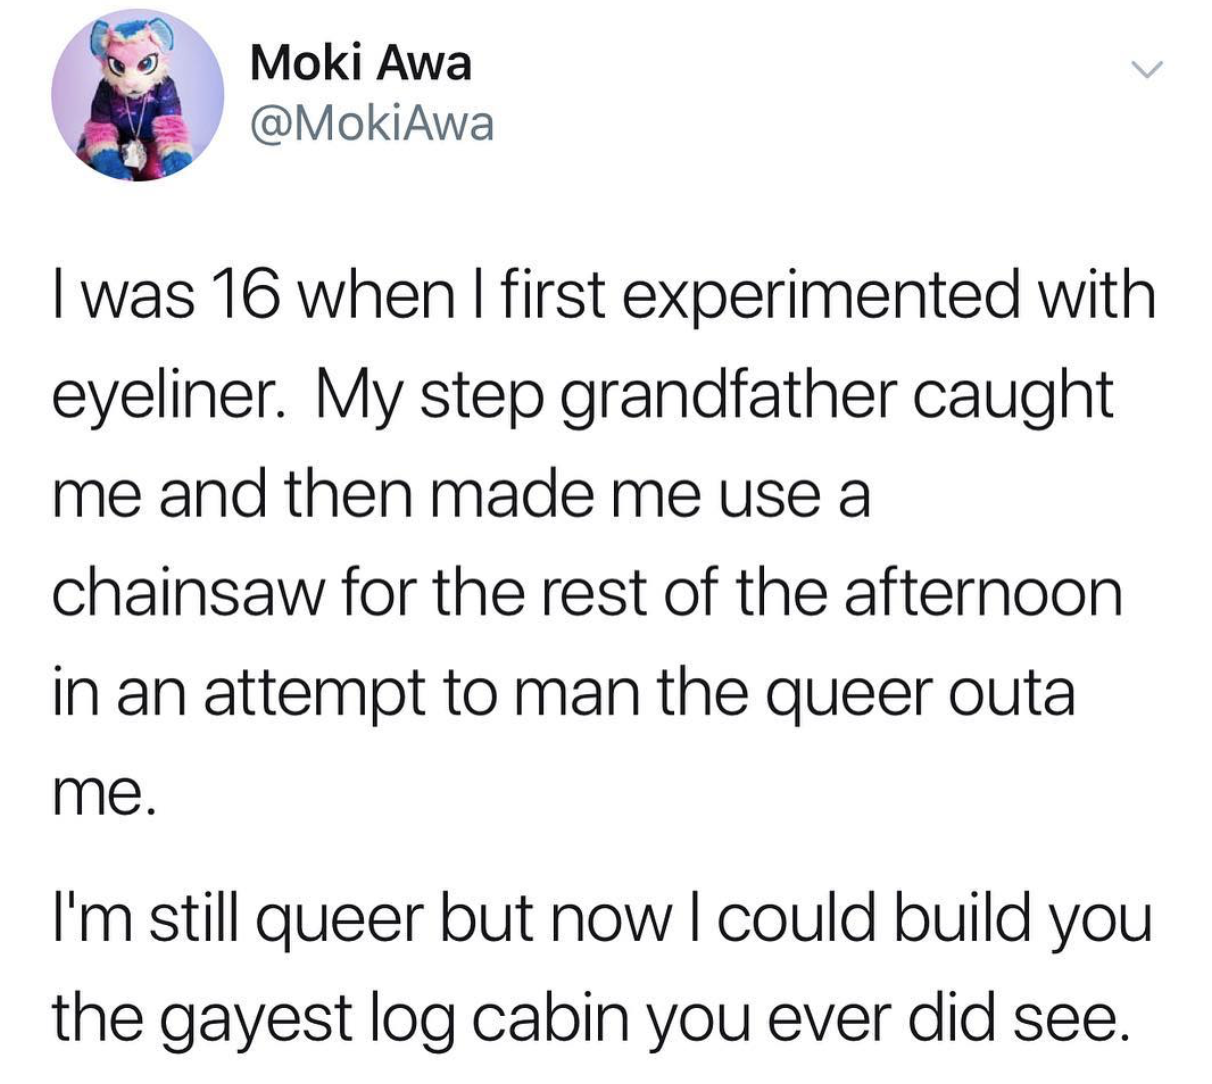 dank memes - Moki Awa I was 16 when I first experimented with eyeliner. My step grandfather caught me and then made me use a chainsaw for the rest of the afternoon in an attempt to man the queer outa me. I'm still queer but now I could build you the gayes